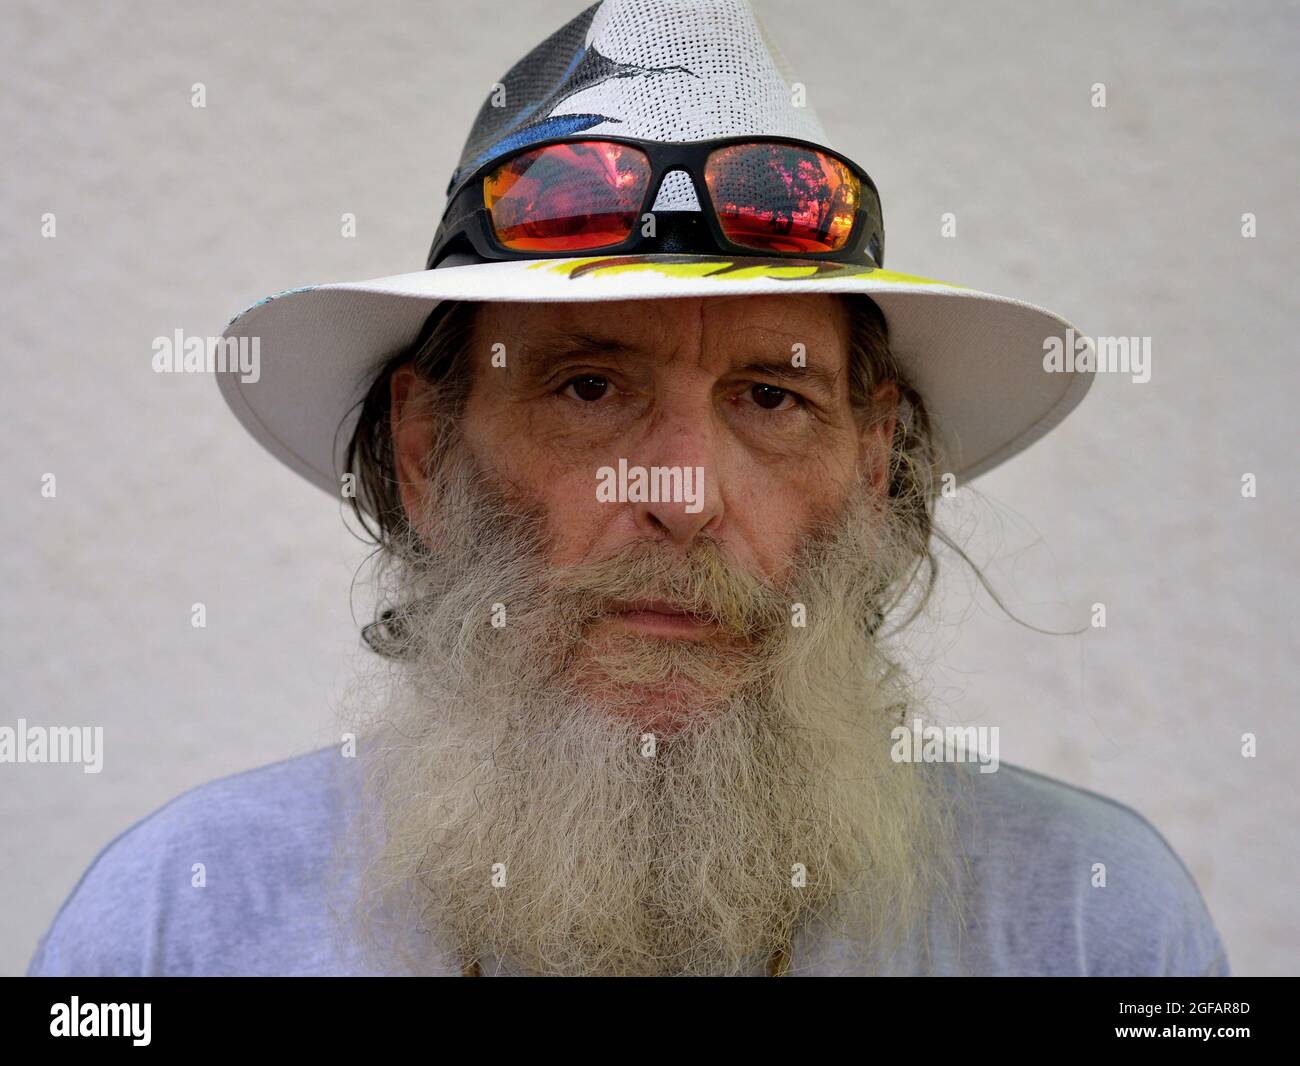 Bearded worried pessimistic elderly Caucasian man wears a Panama hat with colorful sunglasses on the brim and looks at the viewer, white background. Stock Photo